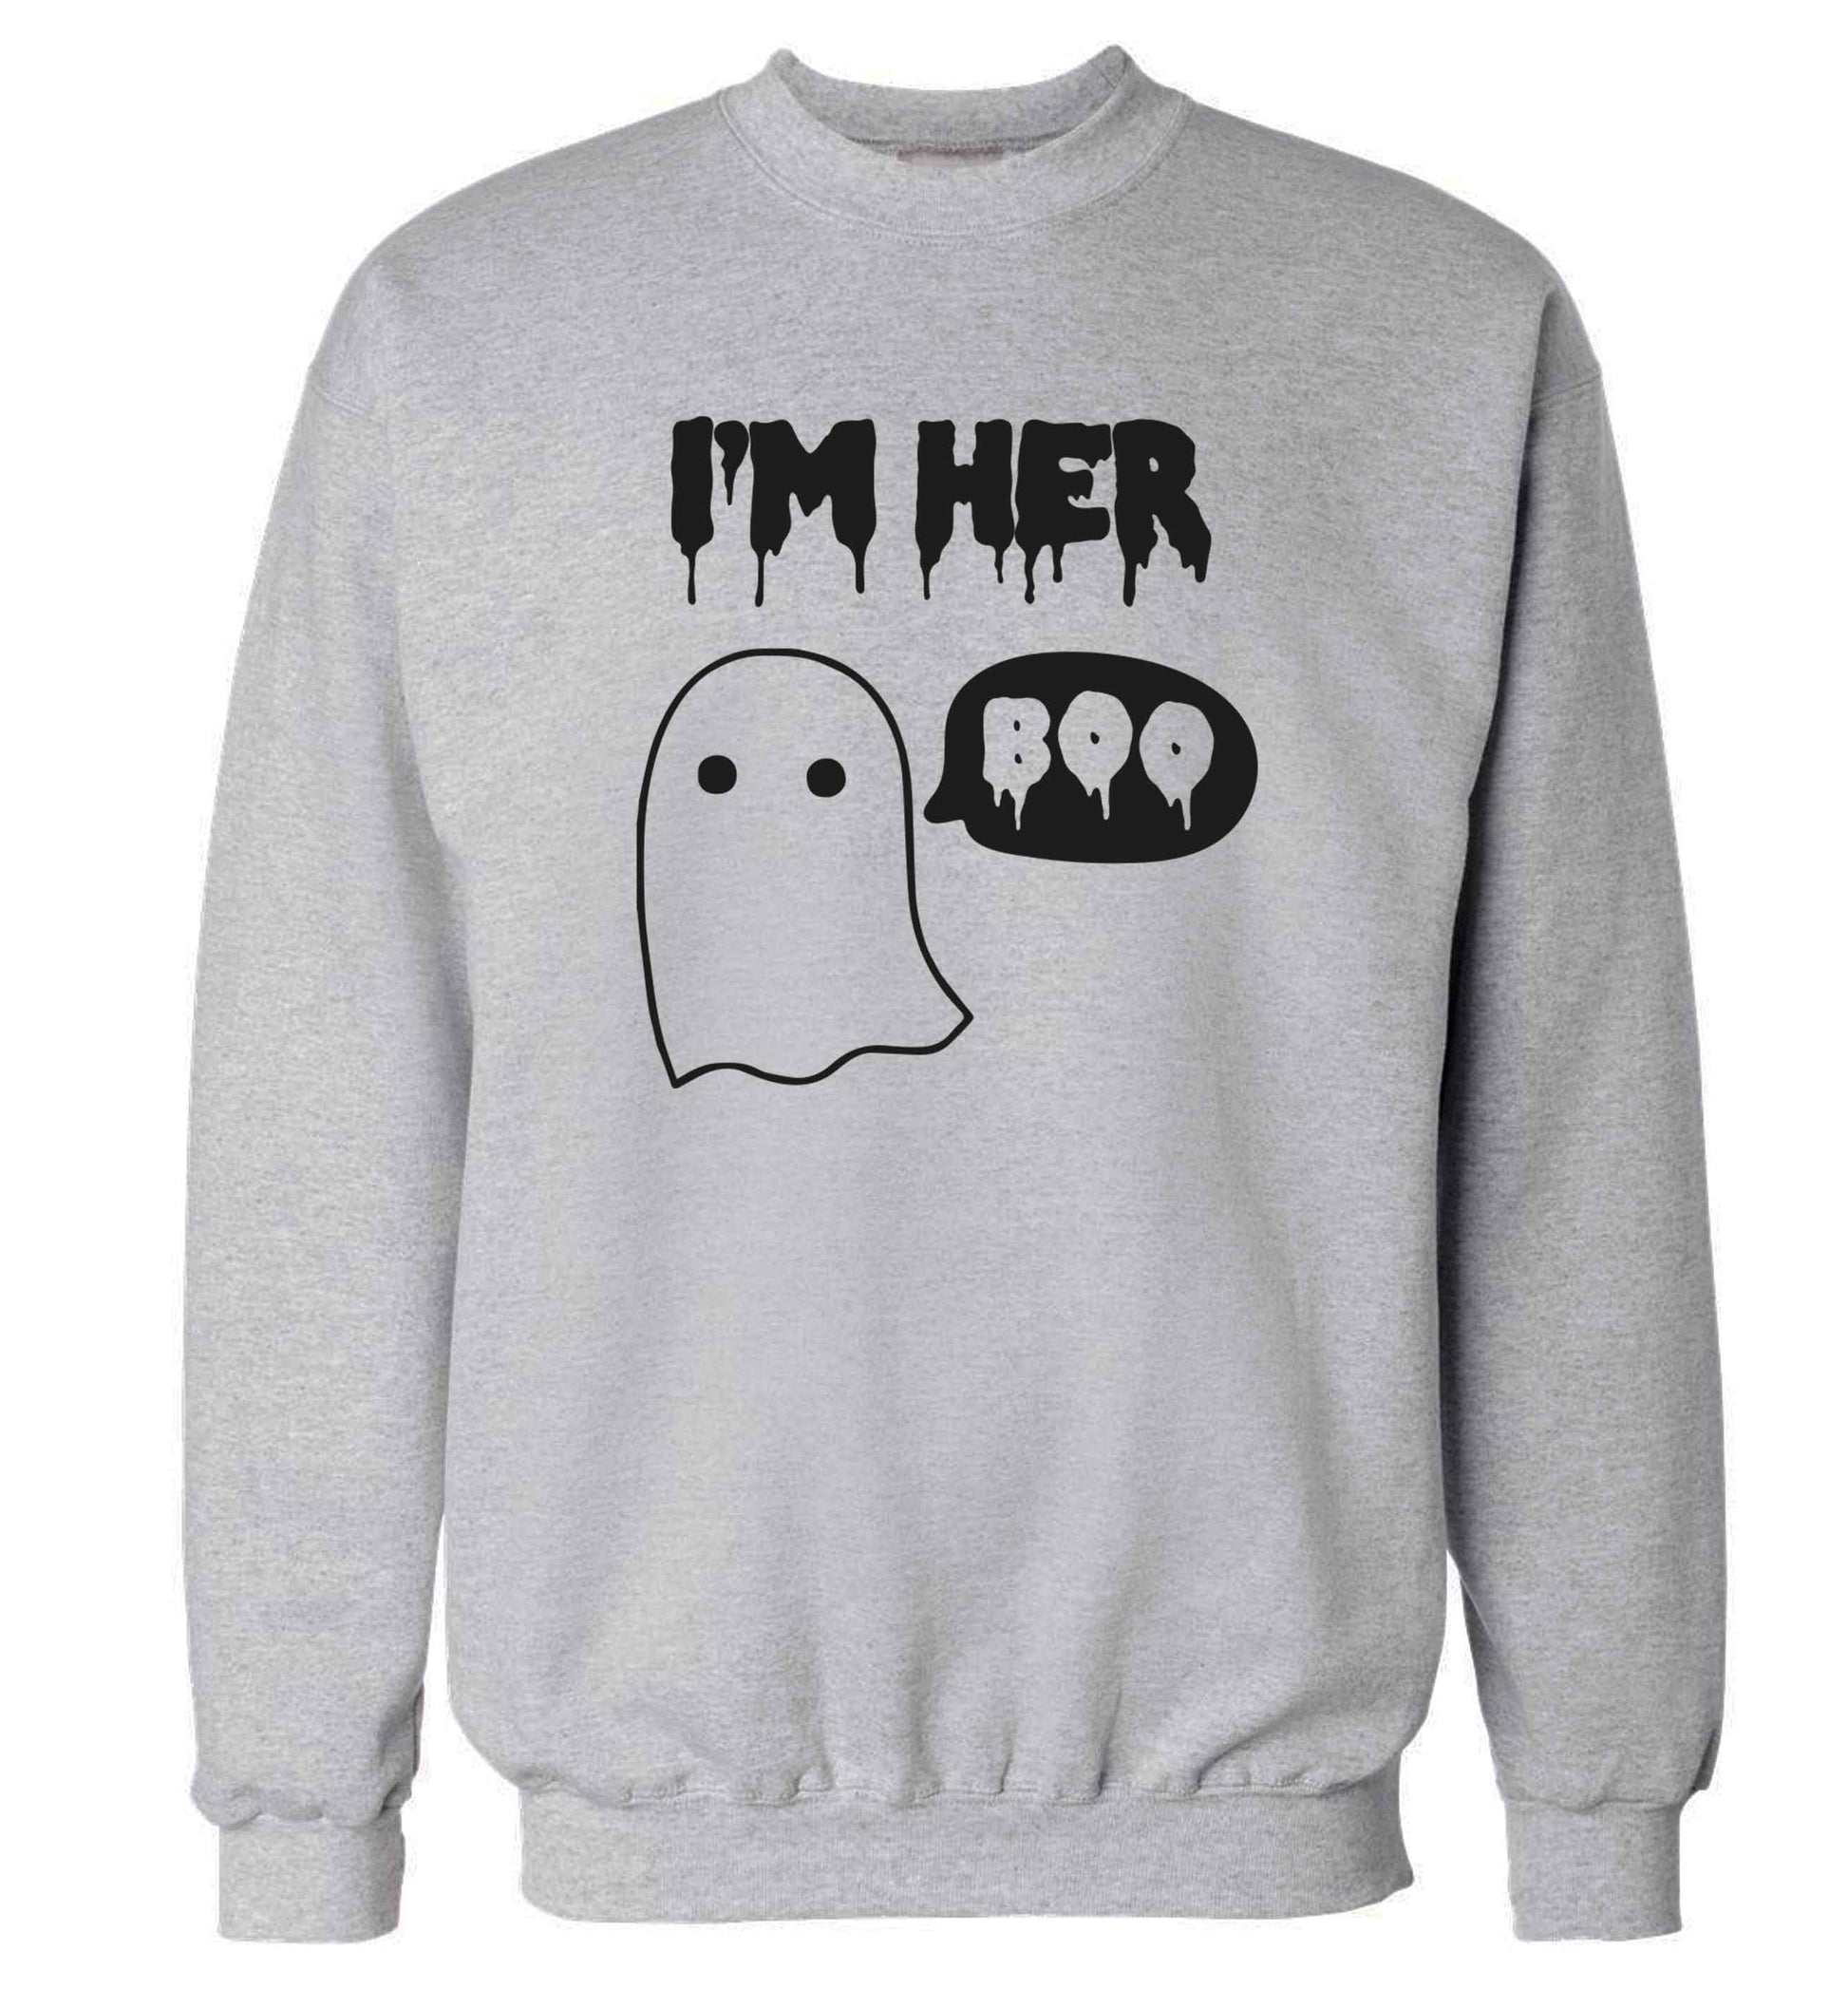 I'm her boo adult's unisex grey sweater 2XL